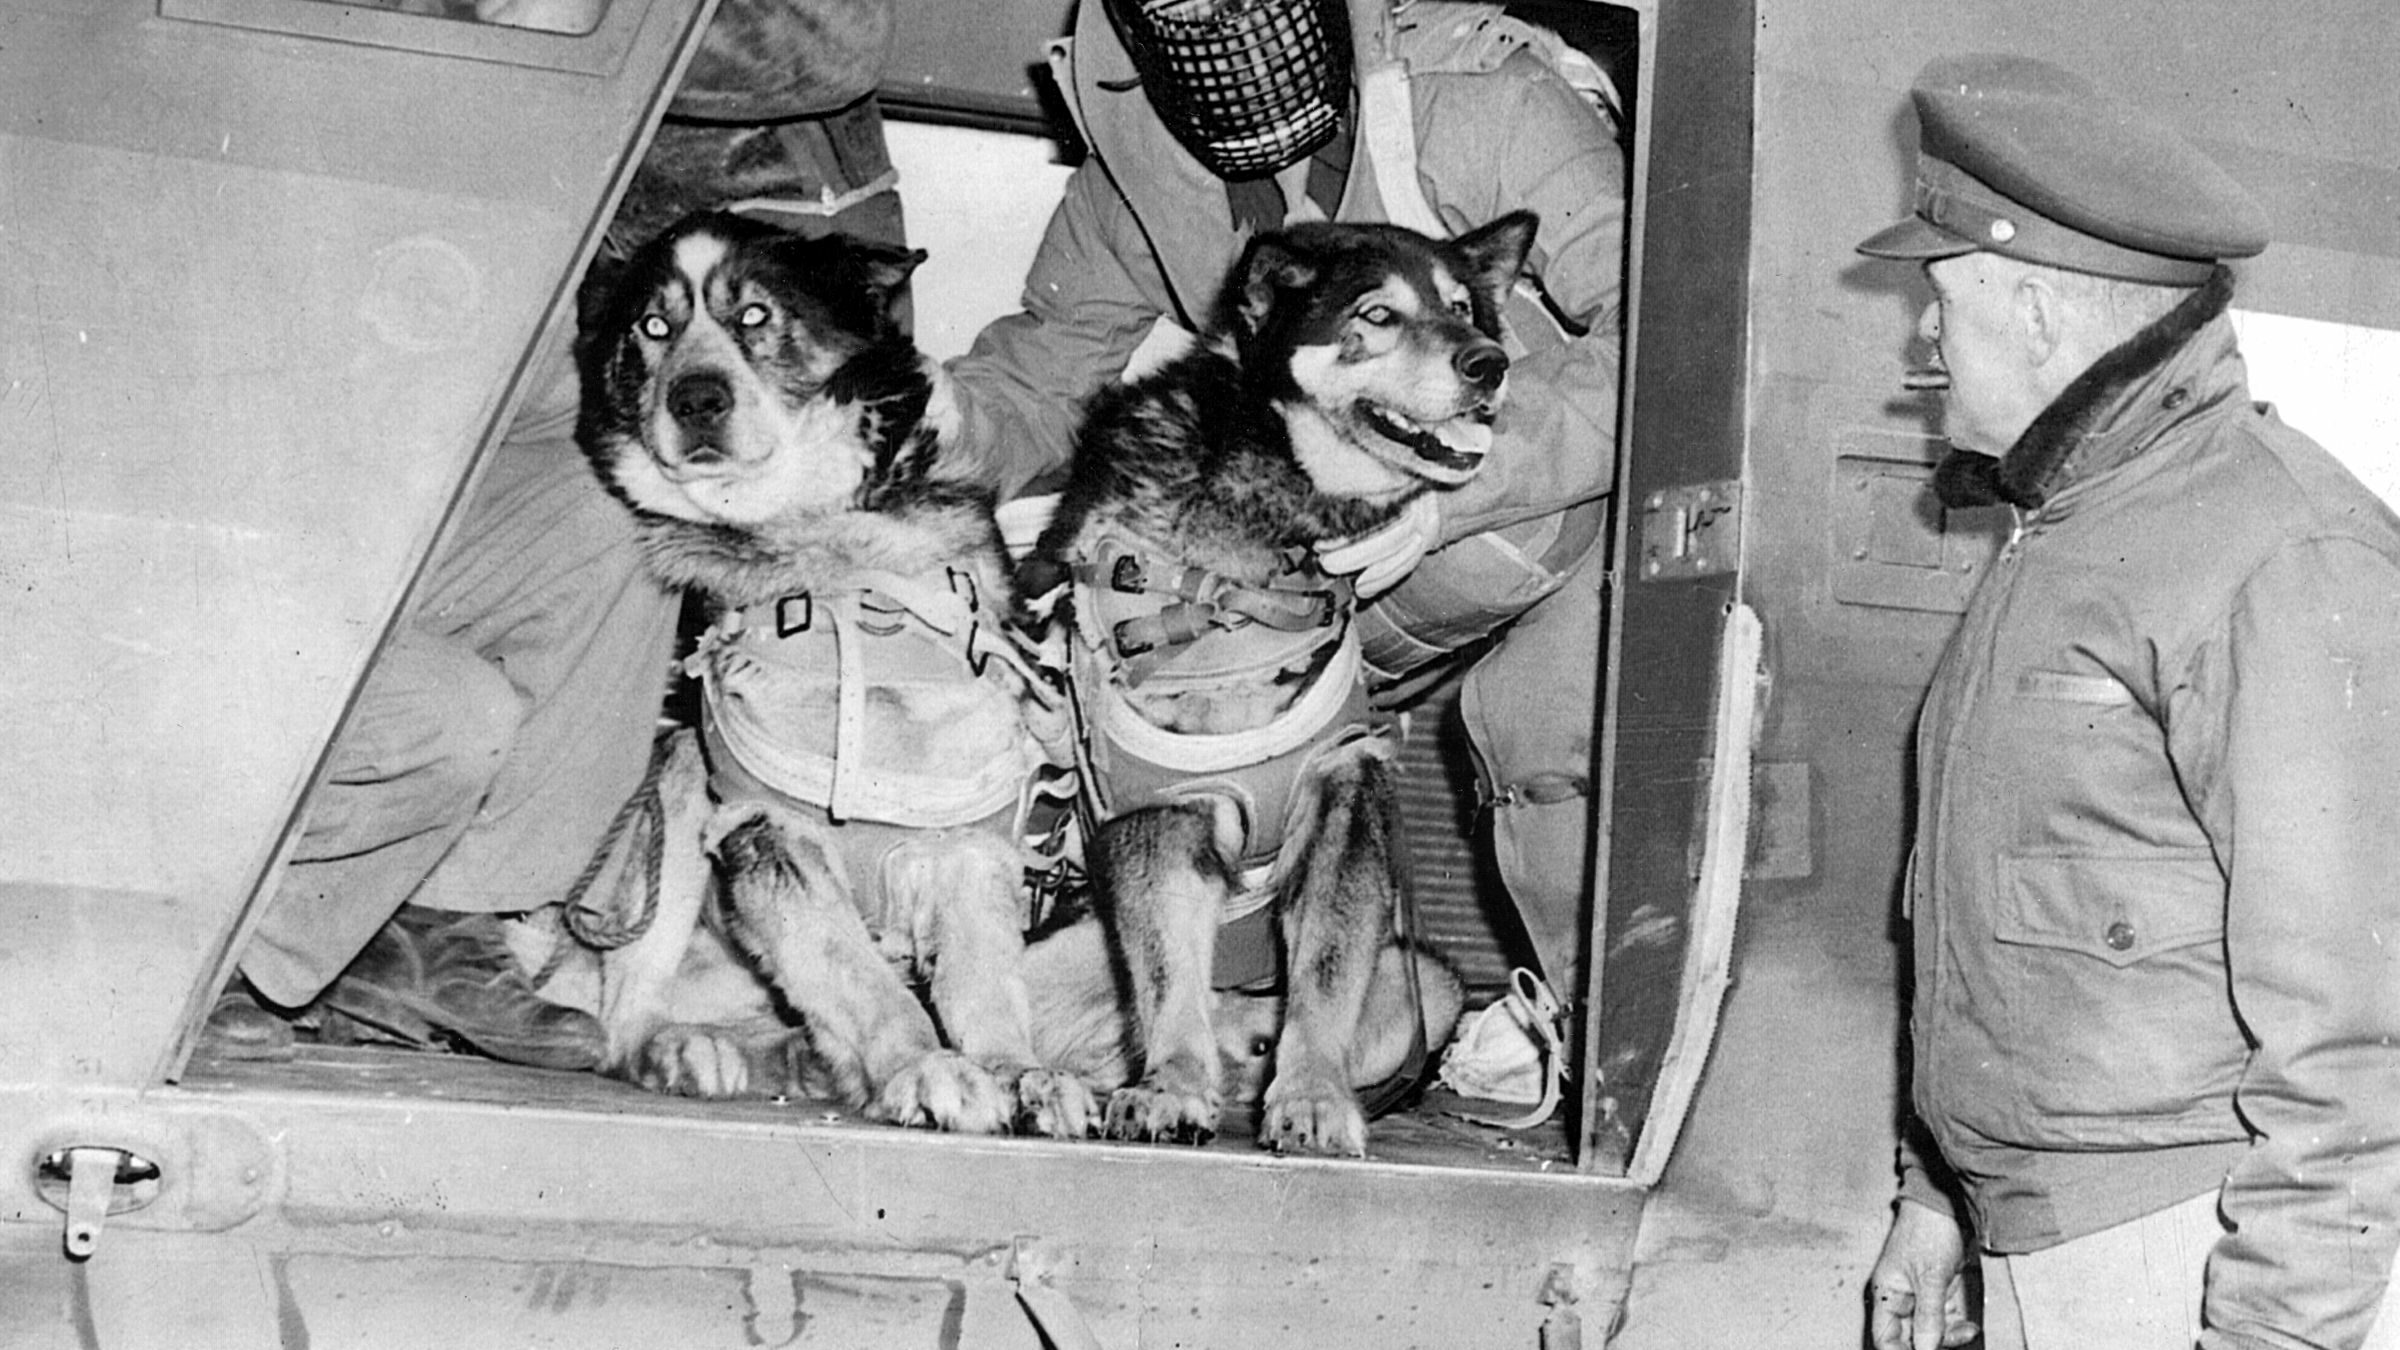 Two 100-pound Siberian Huskies await takeoff from a Canadian airfield. A flight surgeon, with protective gear and mask, is responsible for getting them out of the plane.